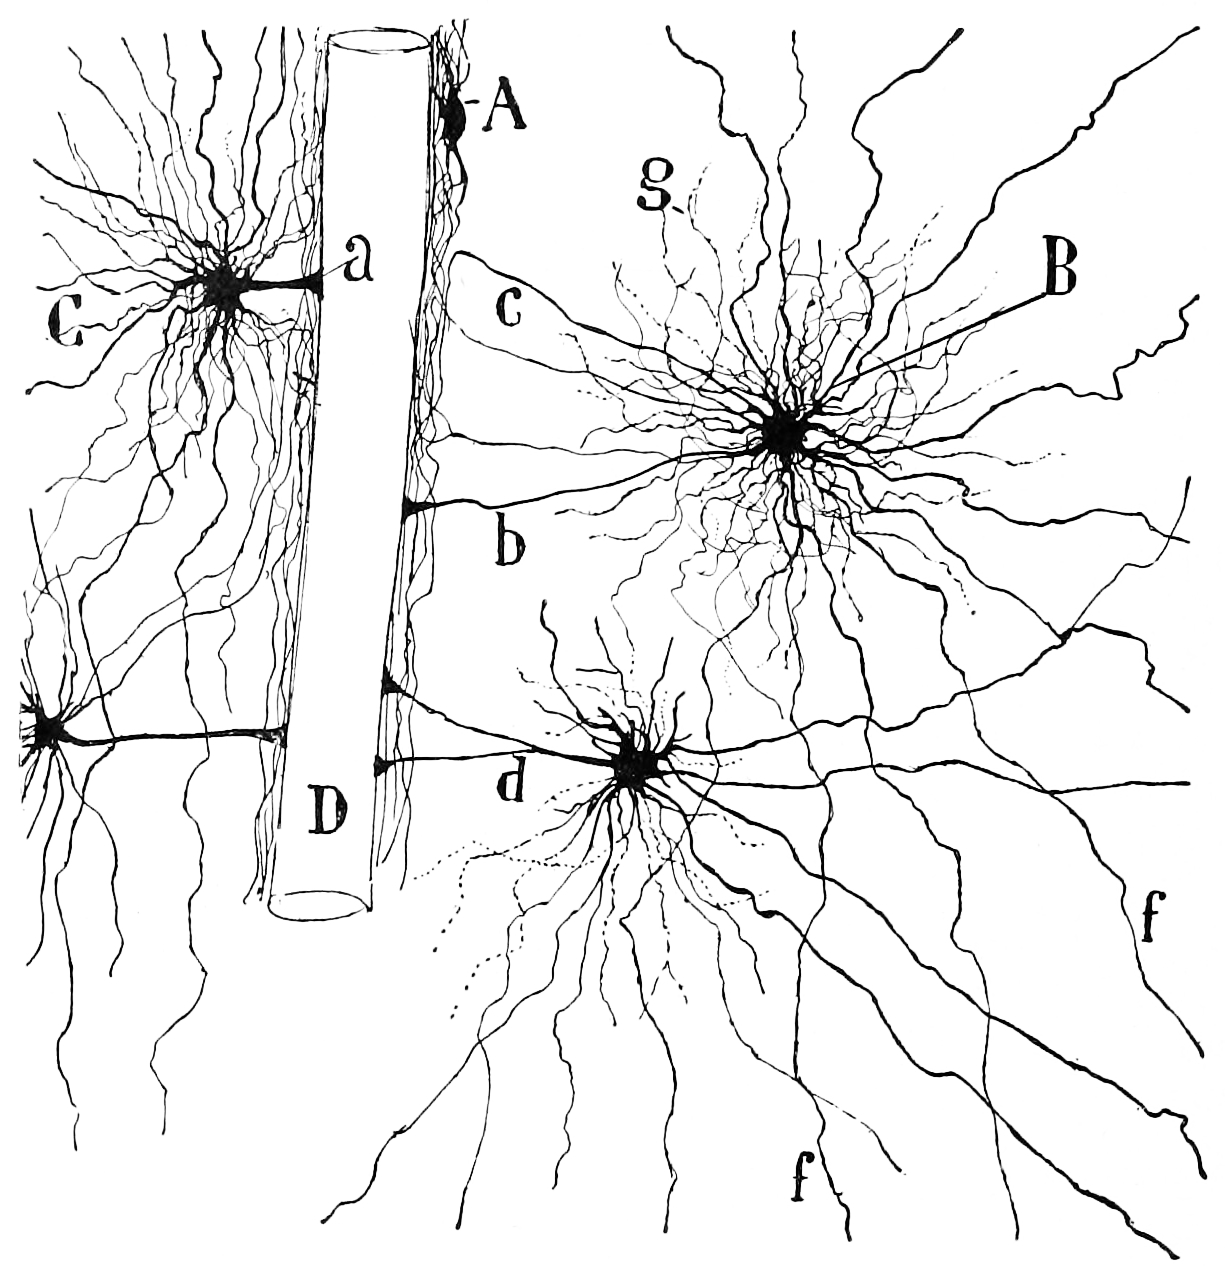 Oligodendrocytes in the white matter of the cerebral cortex with their endfeet touching a brain capillary. Histologie du système nerveux de l’homme & des vertébrés, Tome Premier (1909) by Santiago Ramón y Cajal translated from Spanish by Dr. L. Azoulay.